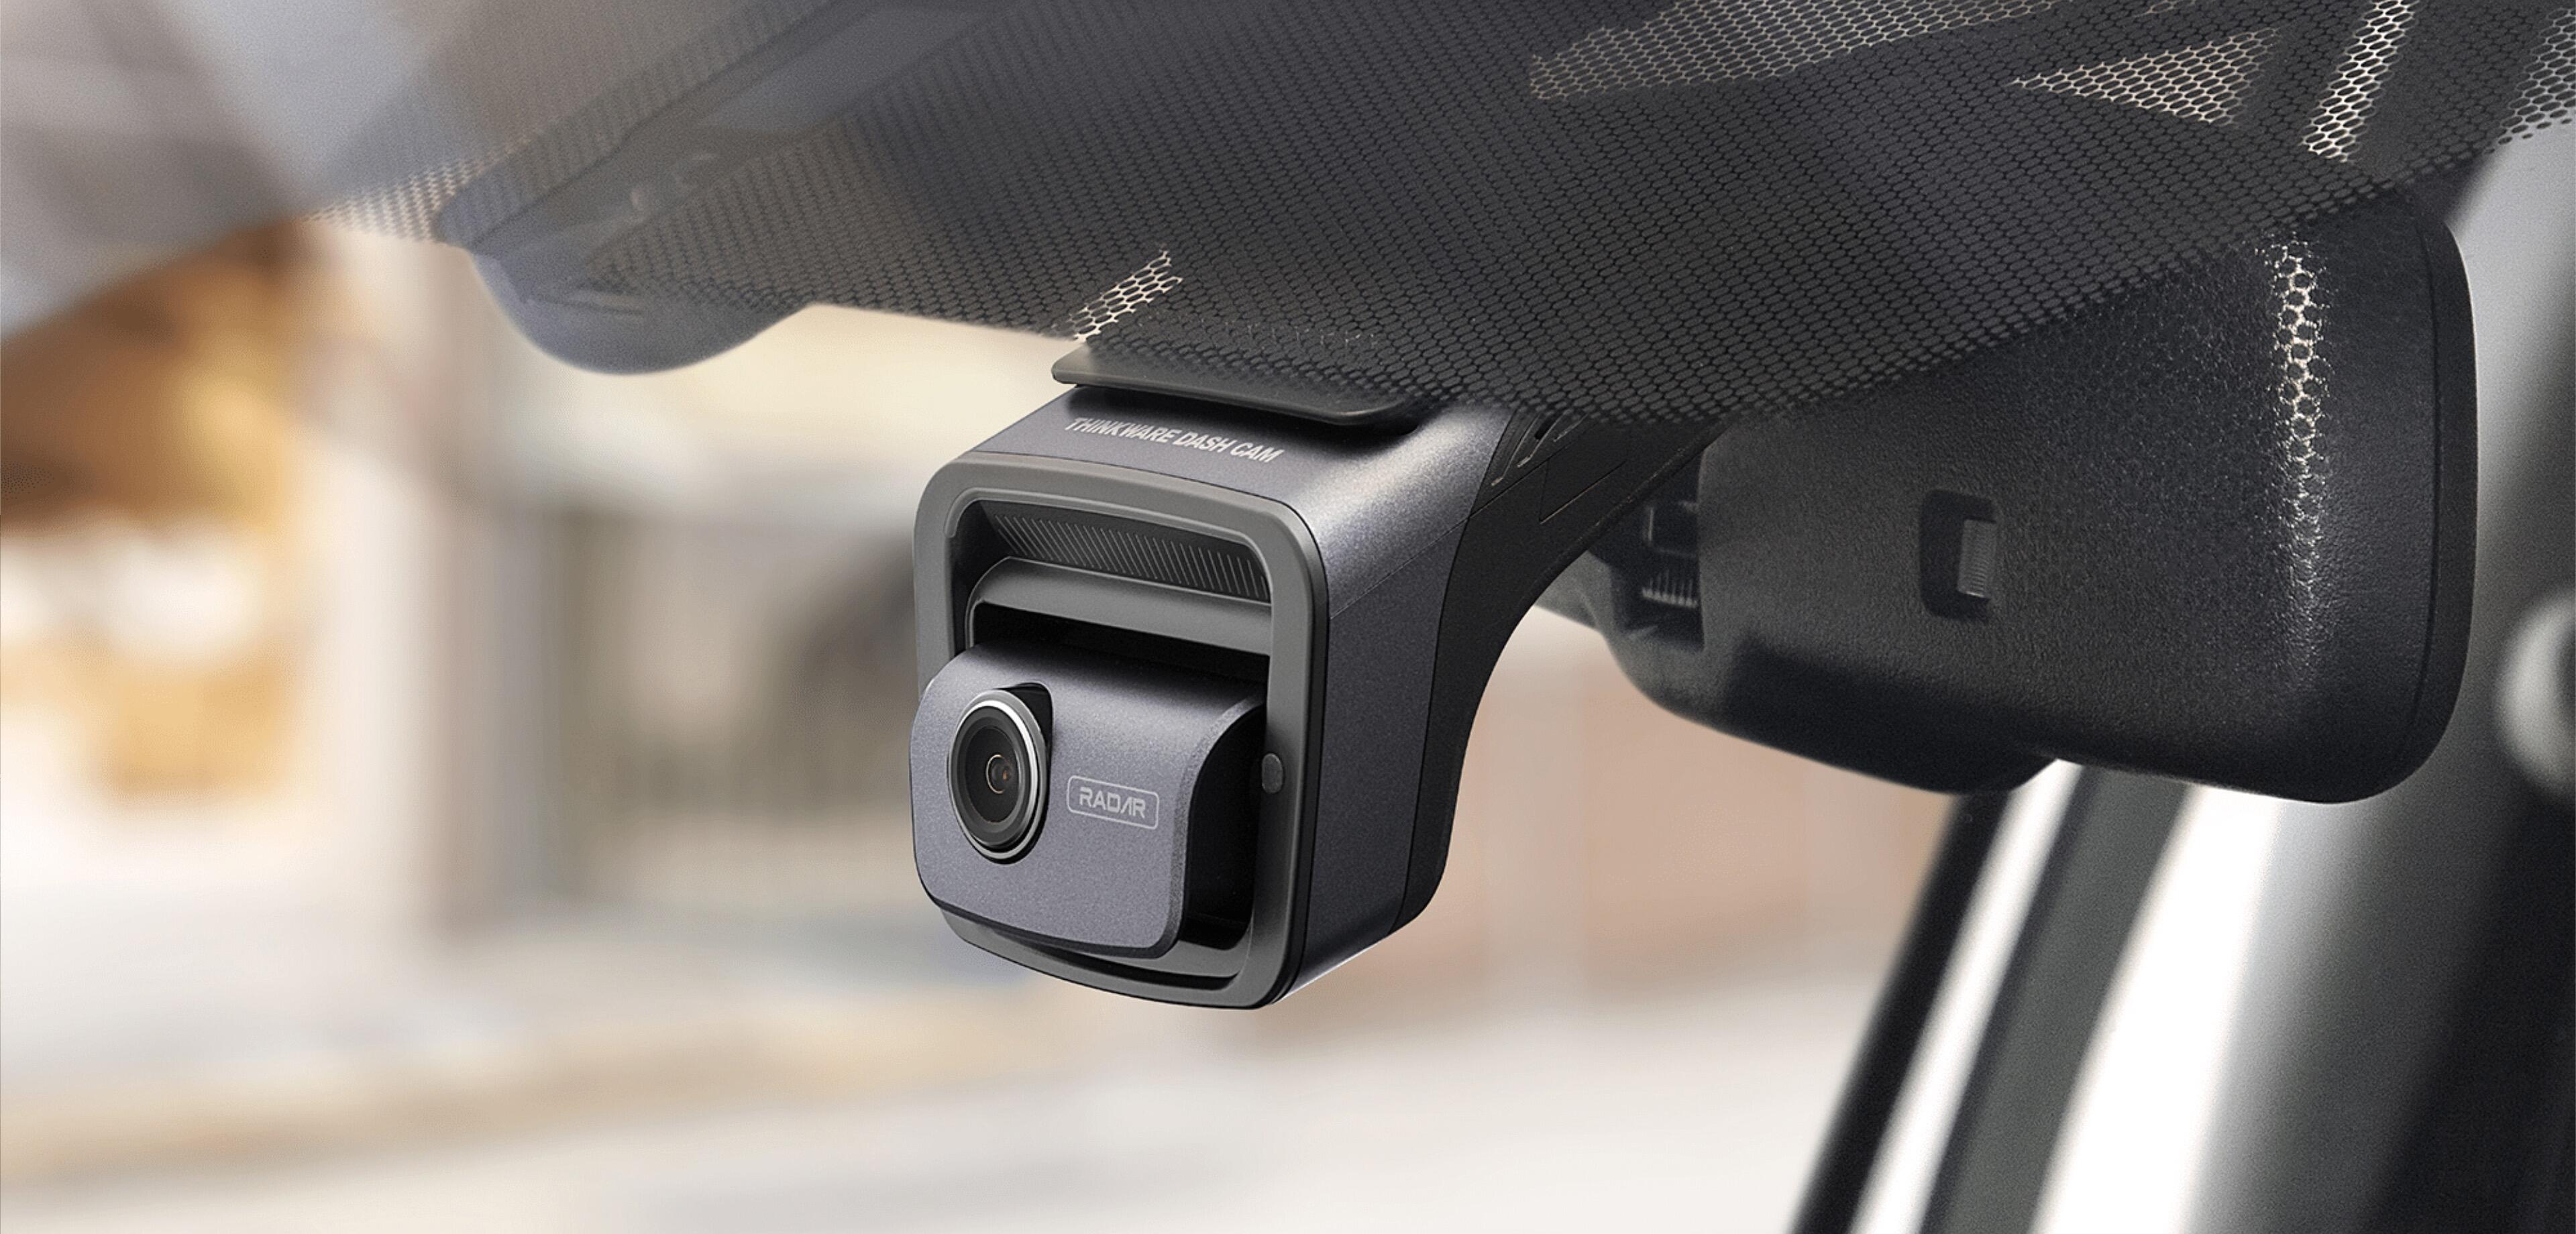 <h3>Thinkware U3000 4K Dash Cam with Built in Radar</h3><h4>Available Now</h4>